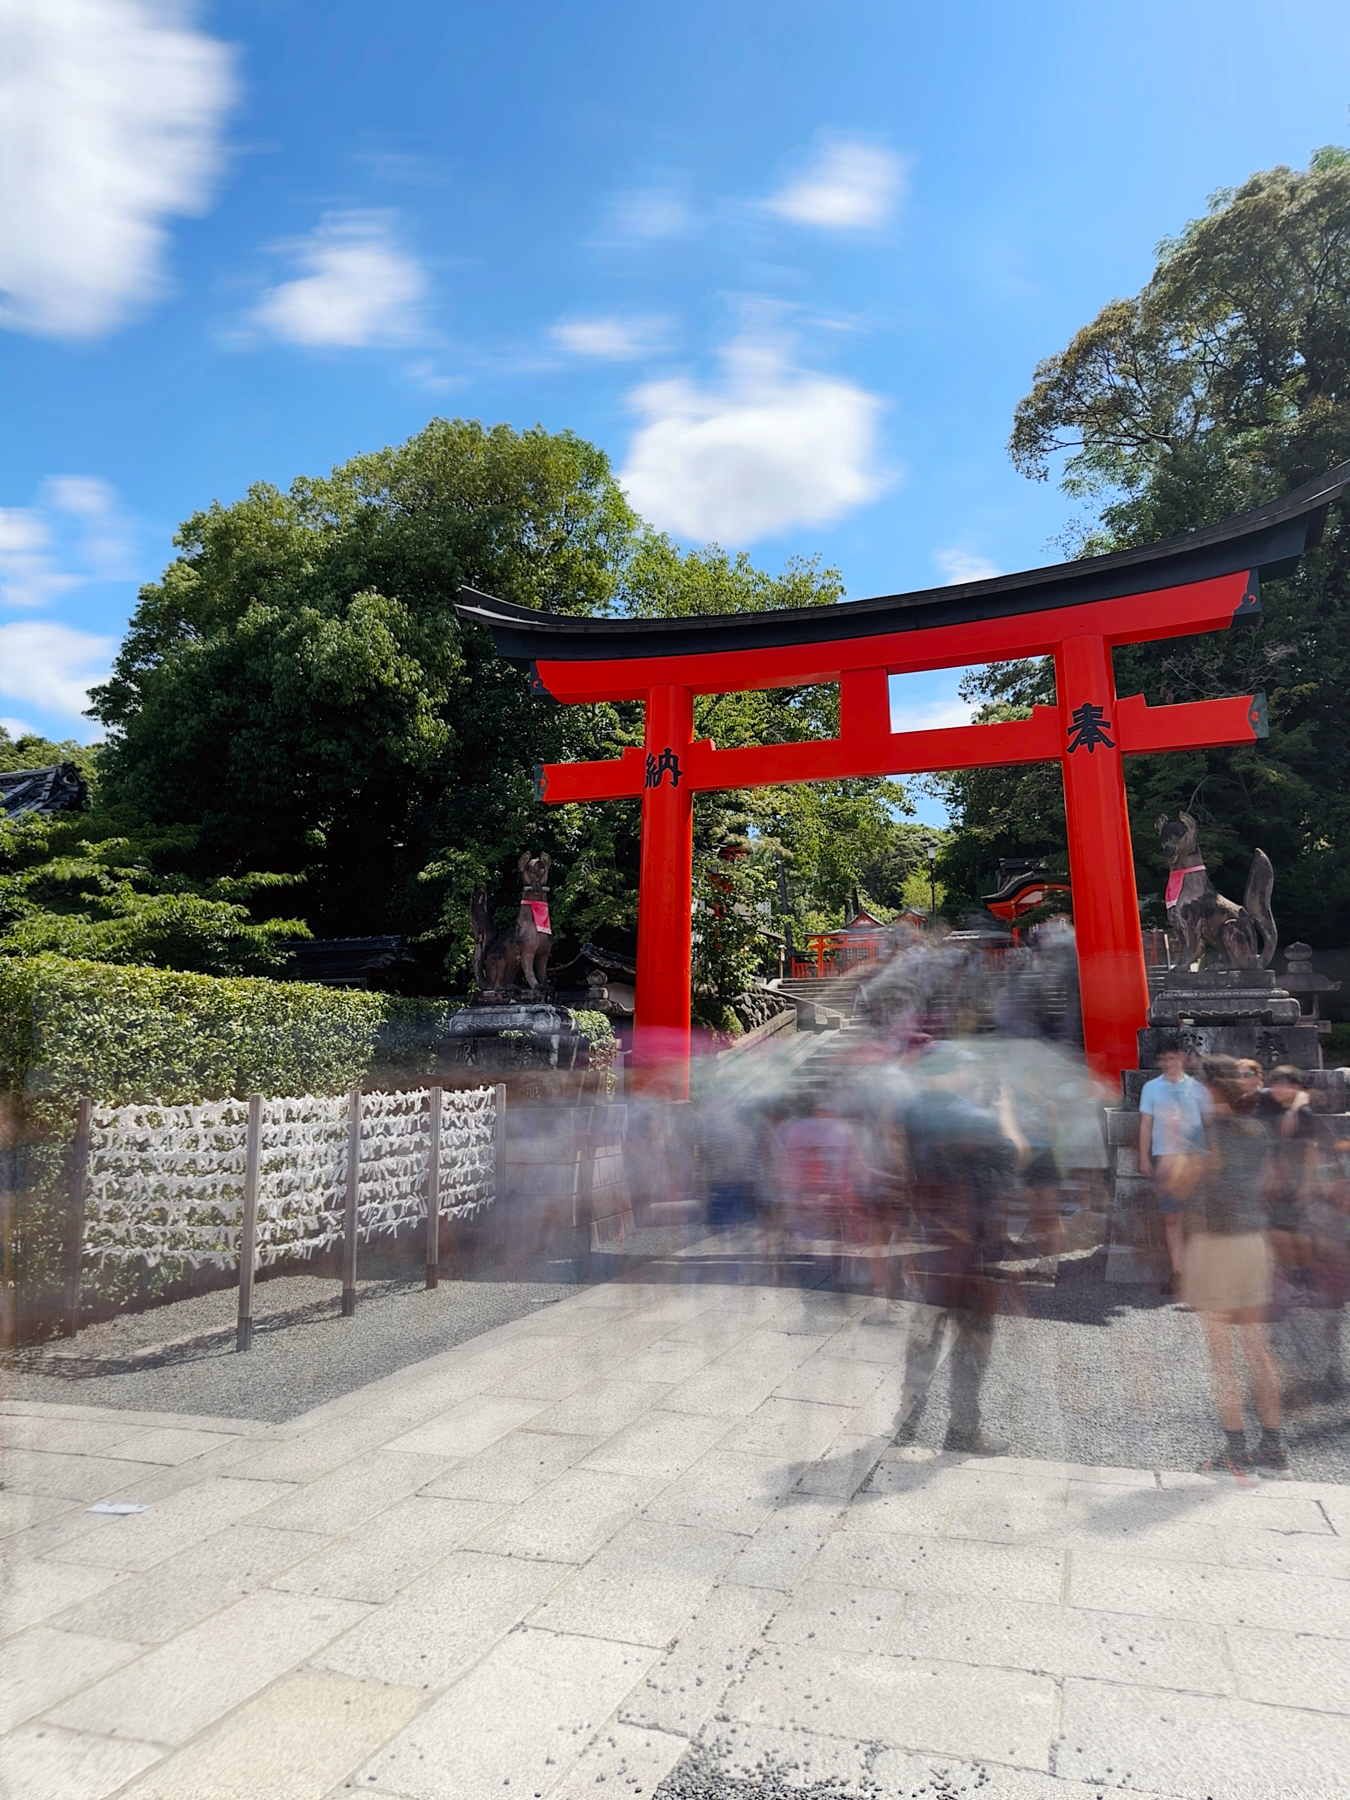 A vibrant red torii gate at the entrance of a Japanese shrine with a blue sky and scattered clouds overhead. Visitors appear as blurred figures, suggesting motion, likely representing the bustling atmosphere at the site. There are lush green trees in the background